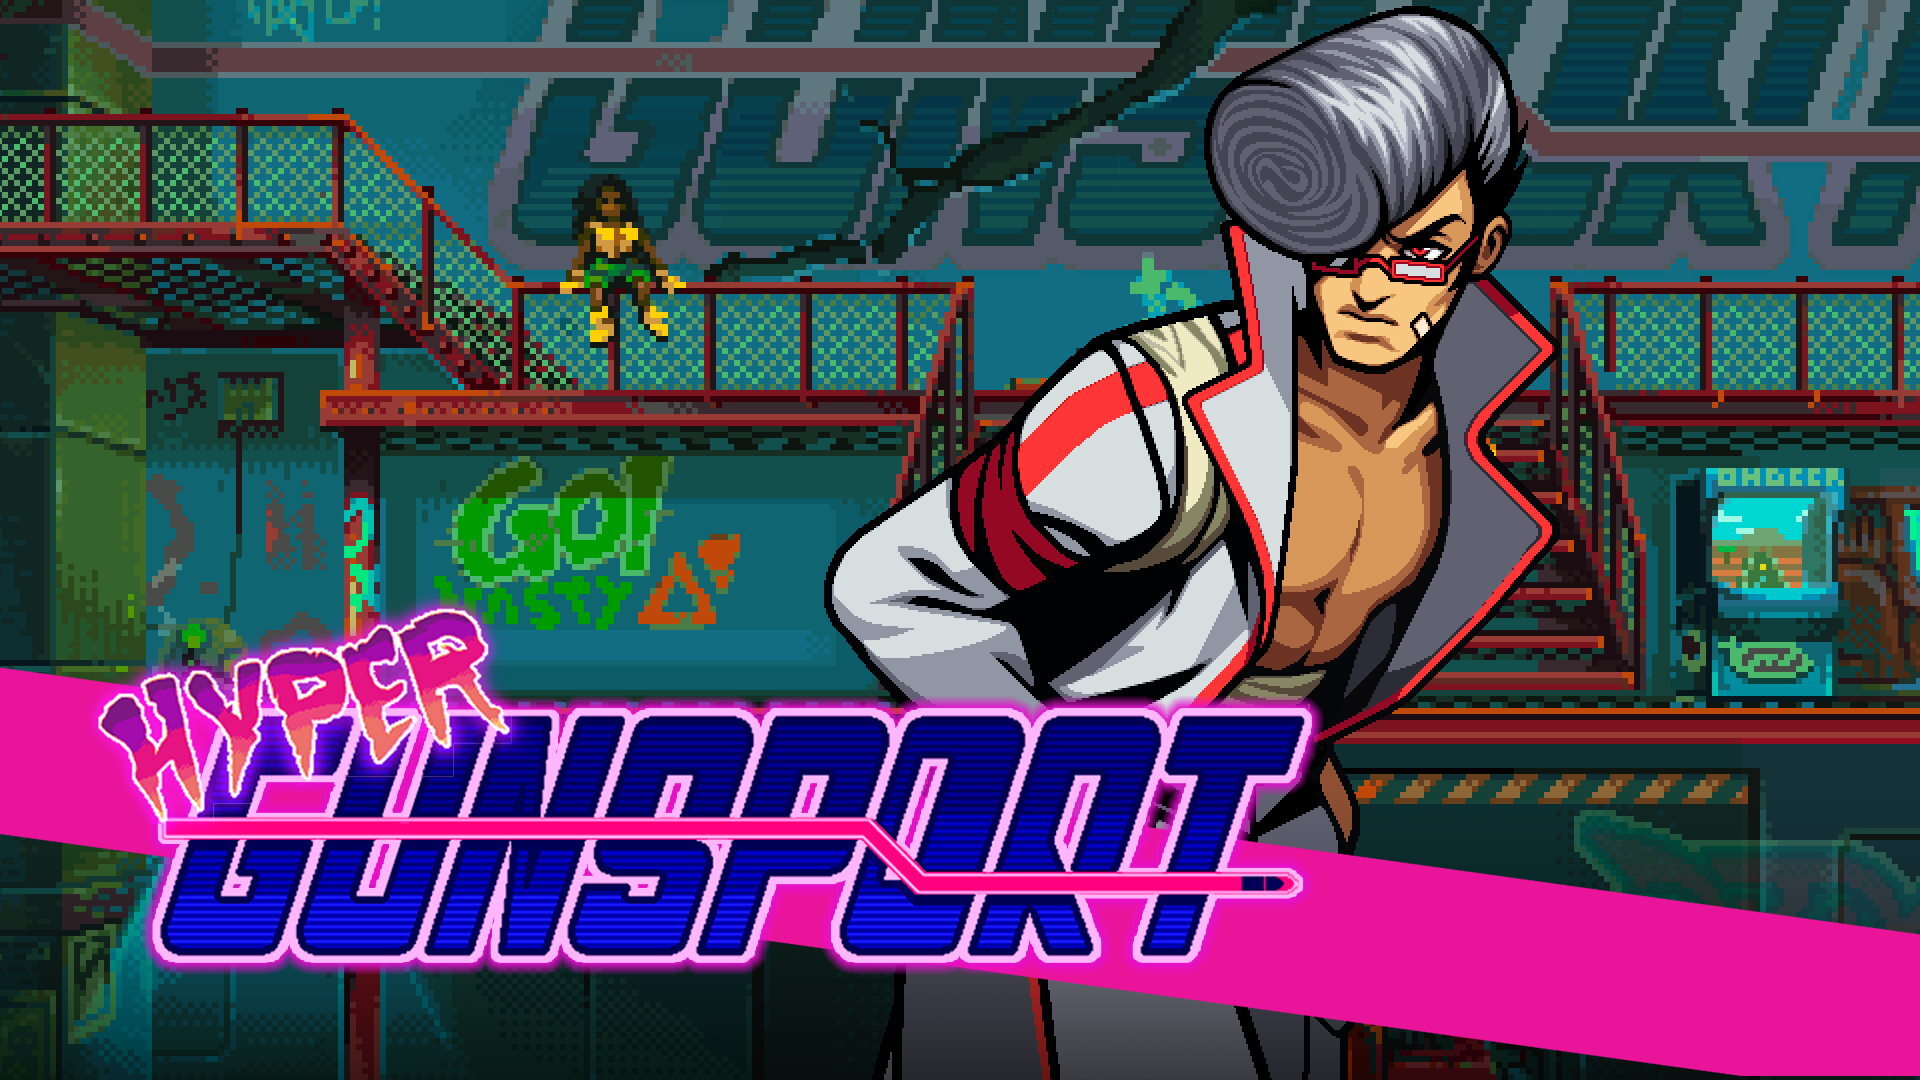 Hyper Gunsport, One of the Oldest ID@Xbox Games, is Finally Available!